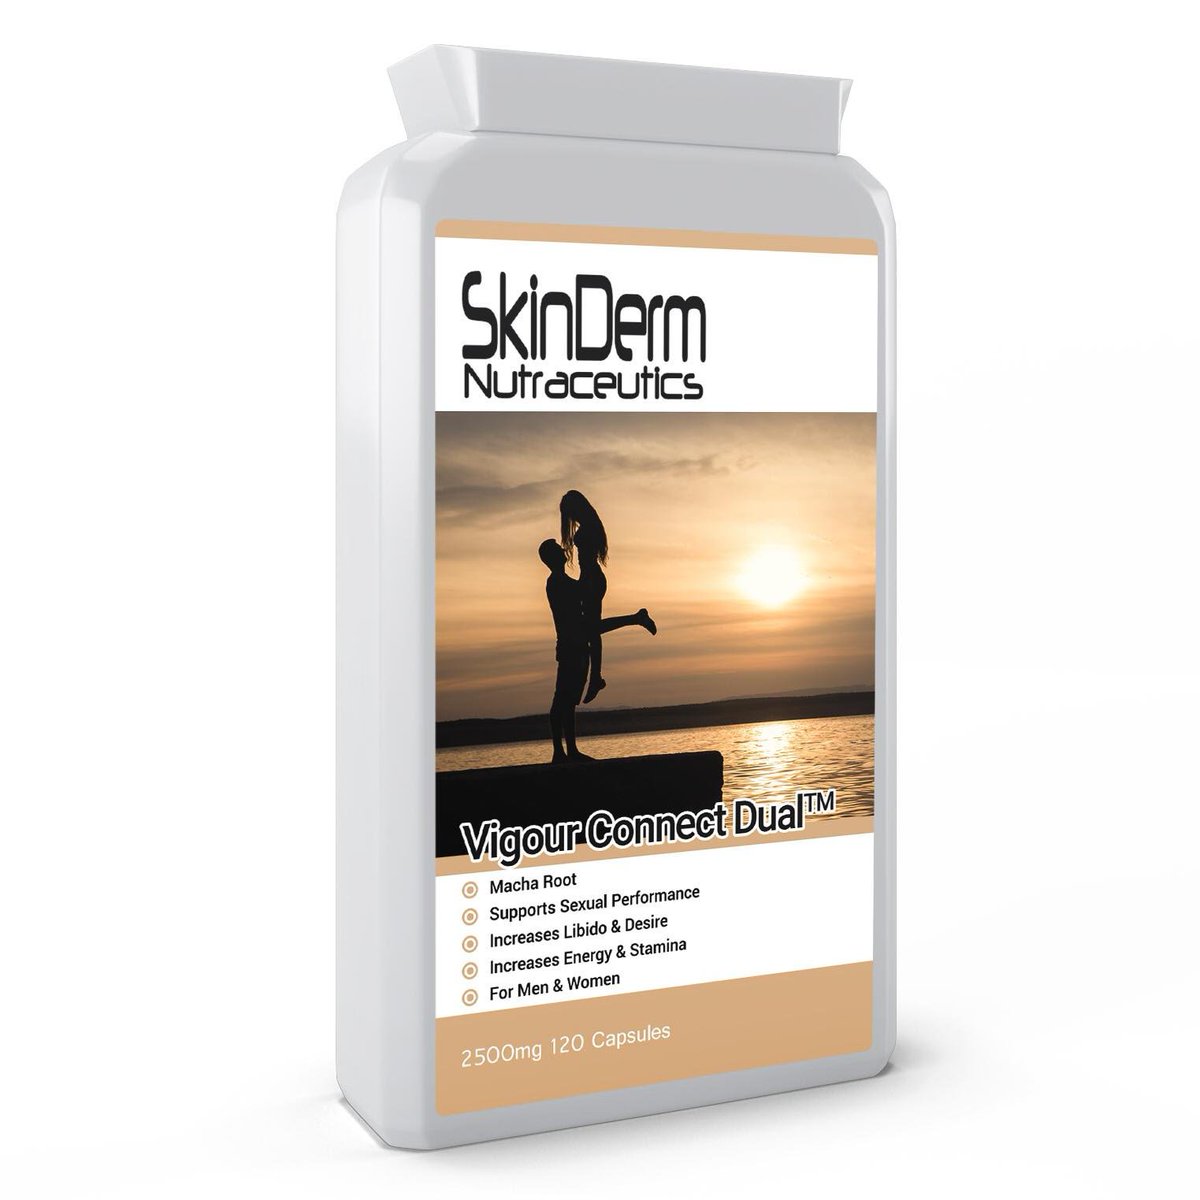 #VigourConnectDual is #SkinDerm Nutraceutics pill with a boost. It contains #Maca Root which is rich in essential #minerals #especiallyselenium #calcium #magnesium #iron.Help to support Maintain #Healthy #SexualFunction GetFrom skinderm.co.uk OR amzn.to/2zP5s0N